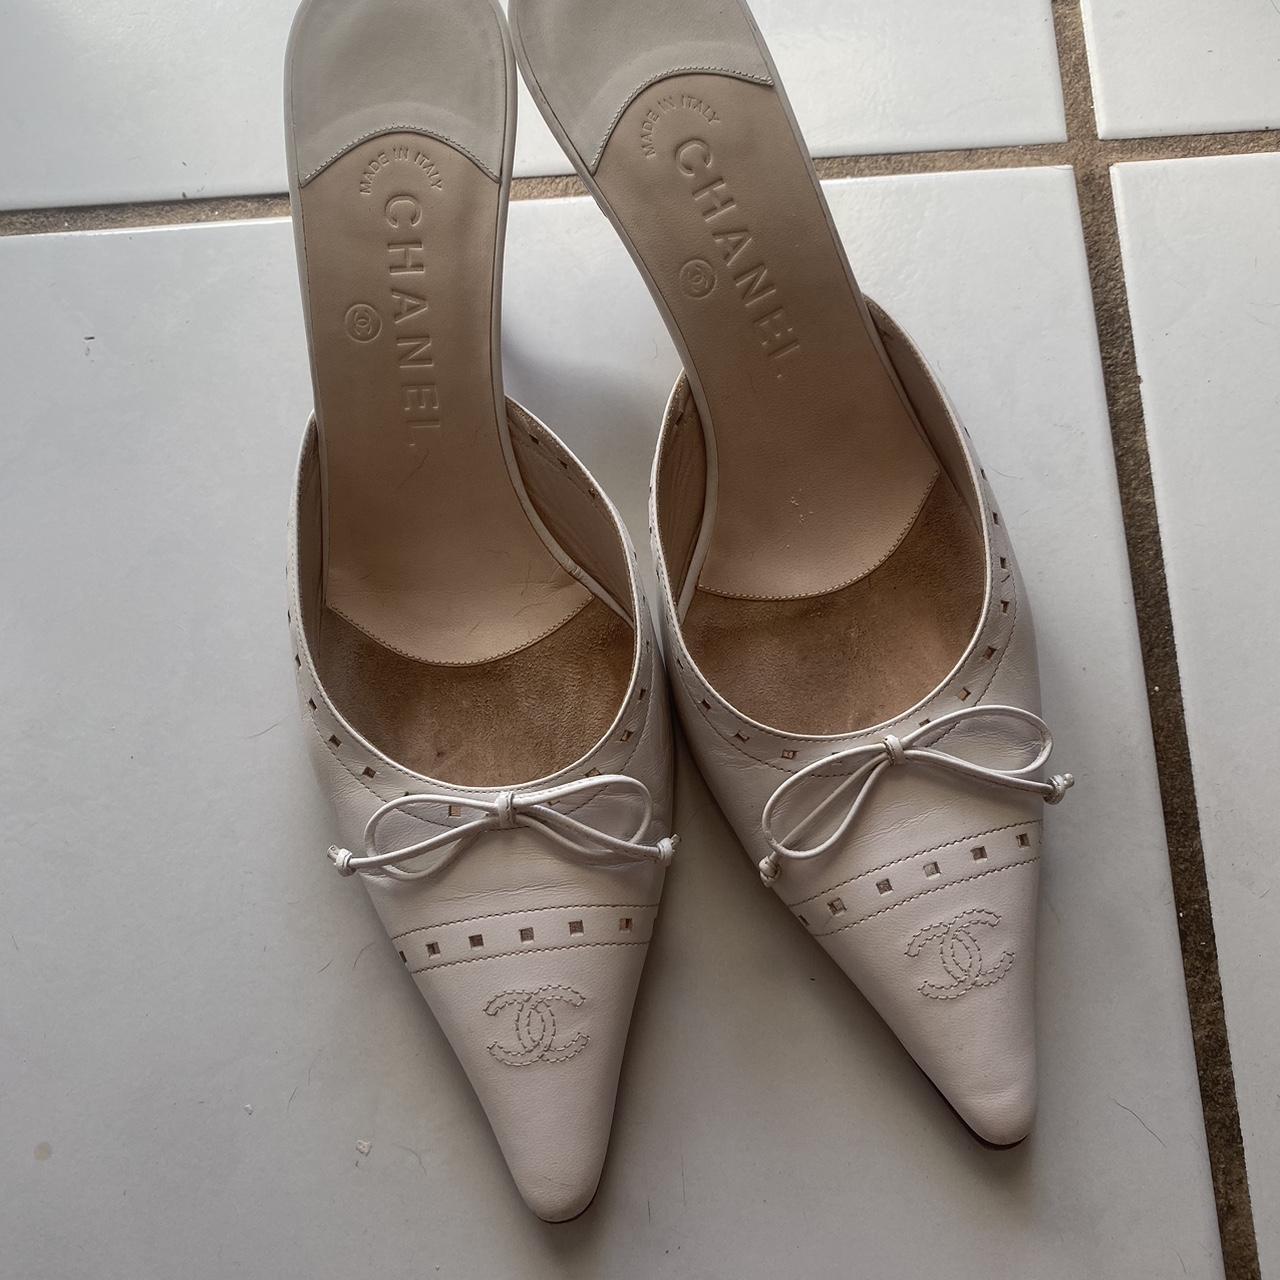 Rare Chanel vintage bow heels. So hard to find and... - Depop